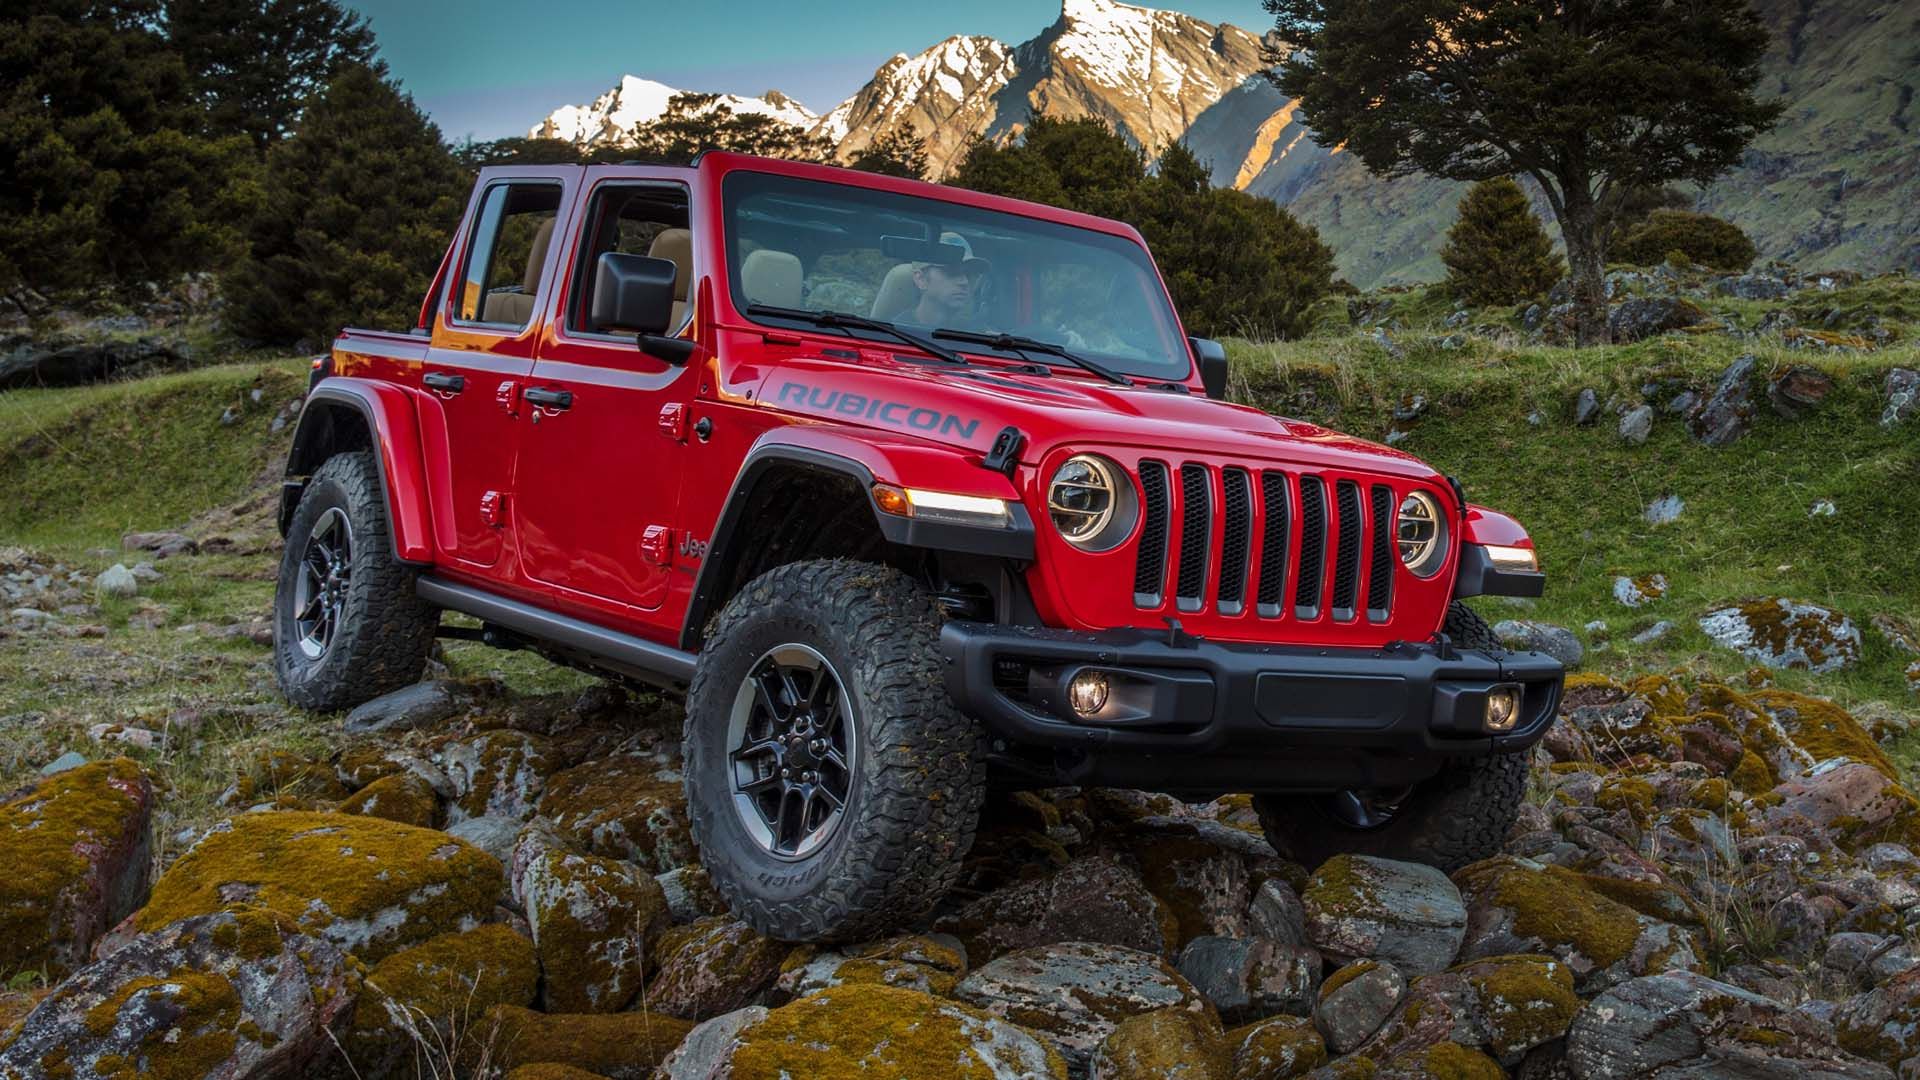 2022 Jeep Wrangler Rubicon: The king of the off-road trail.